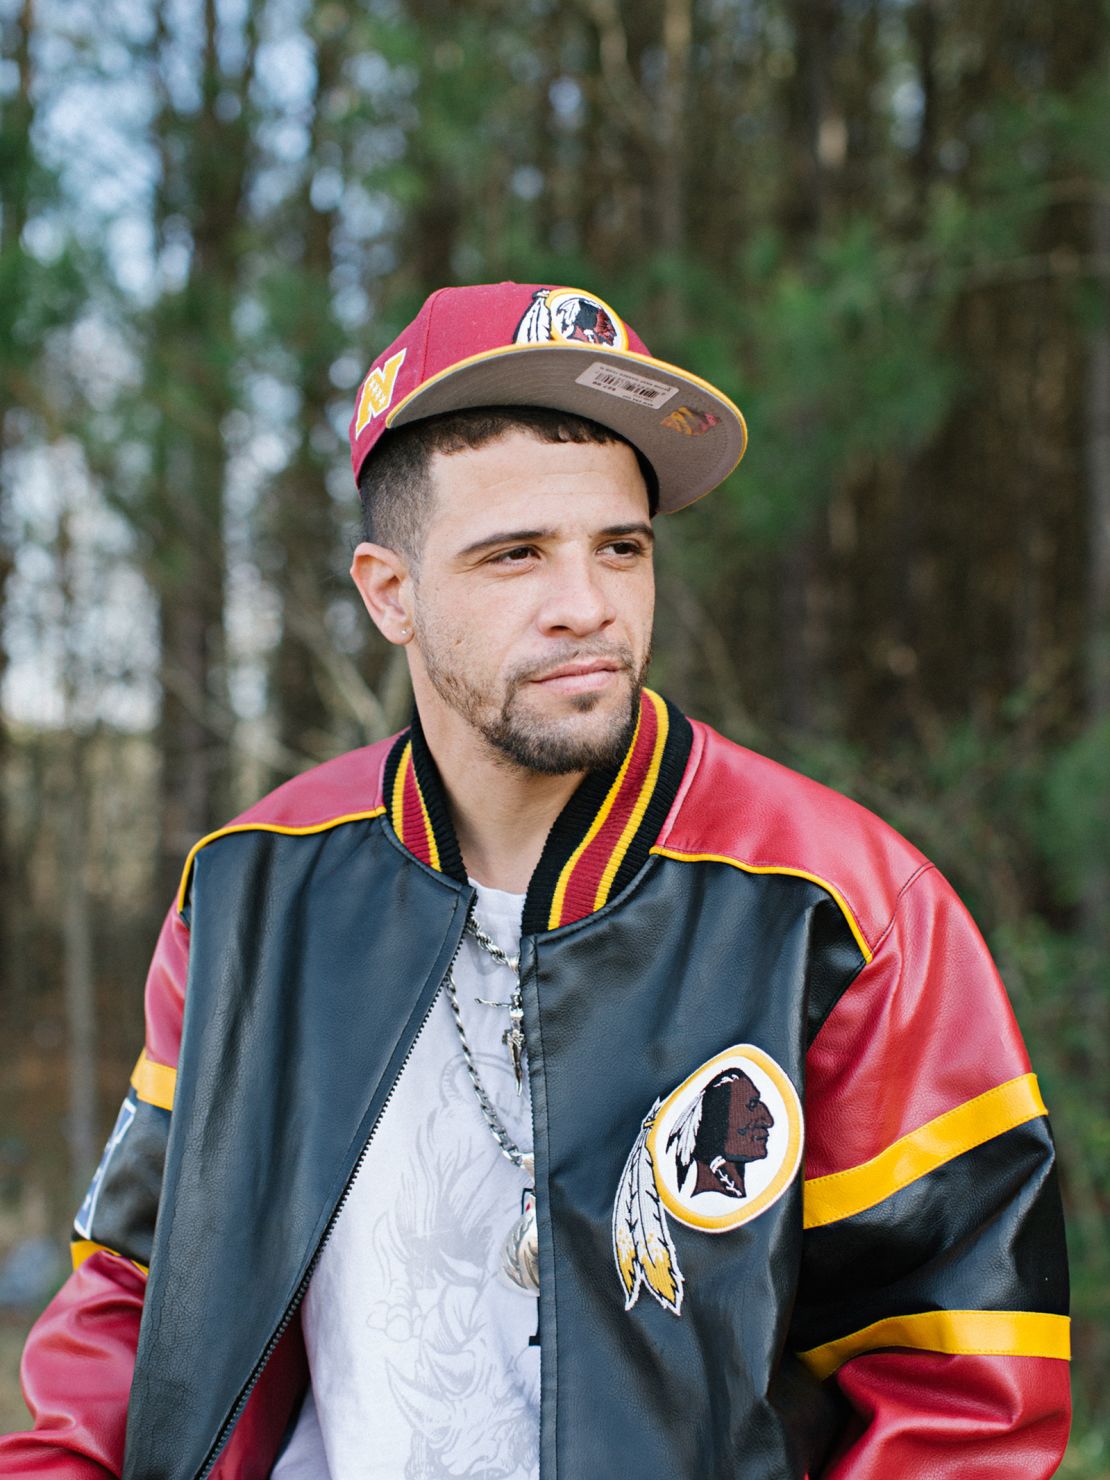 Scottie wears a Washington Redskins jacket. Though many Native people would consider the imagery offensive, Sturm said he saw the jacket as a reflection of his identity.